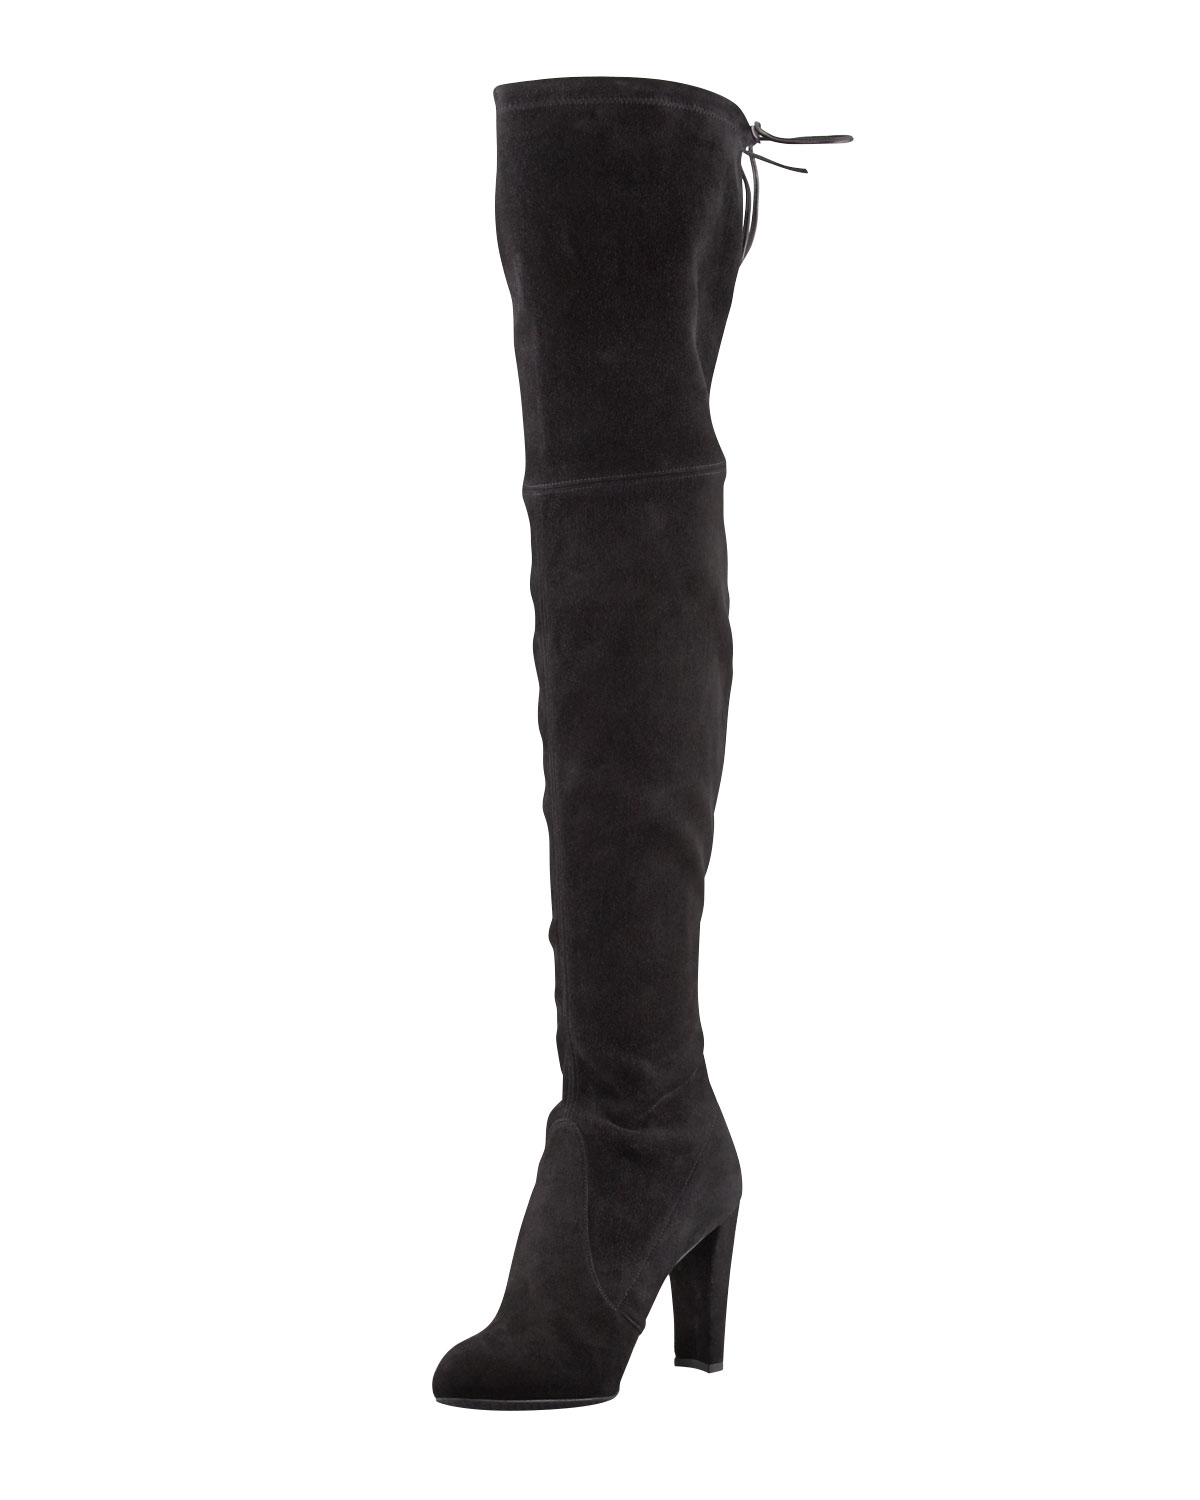 Stuart weitzman Highland Stretchy Suede Over-The-Knee Boot in Black | Lyst